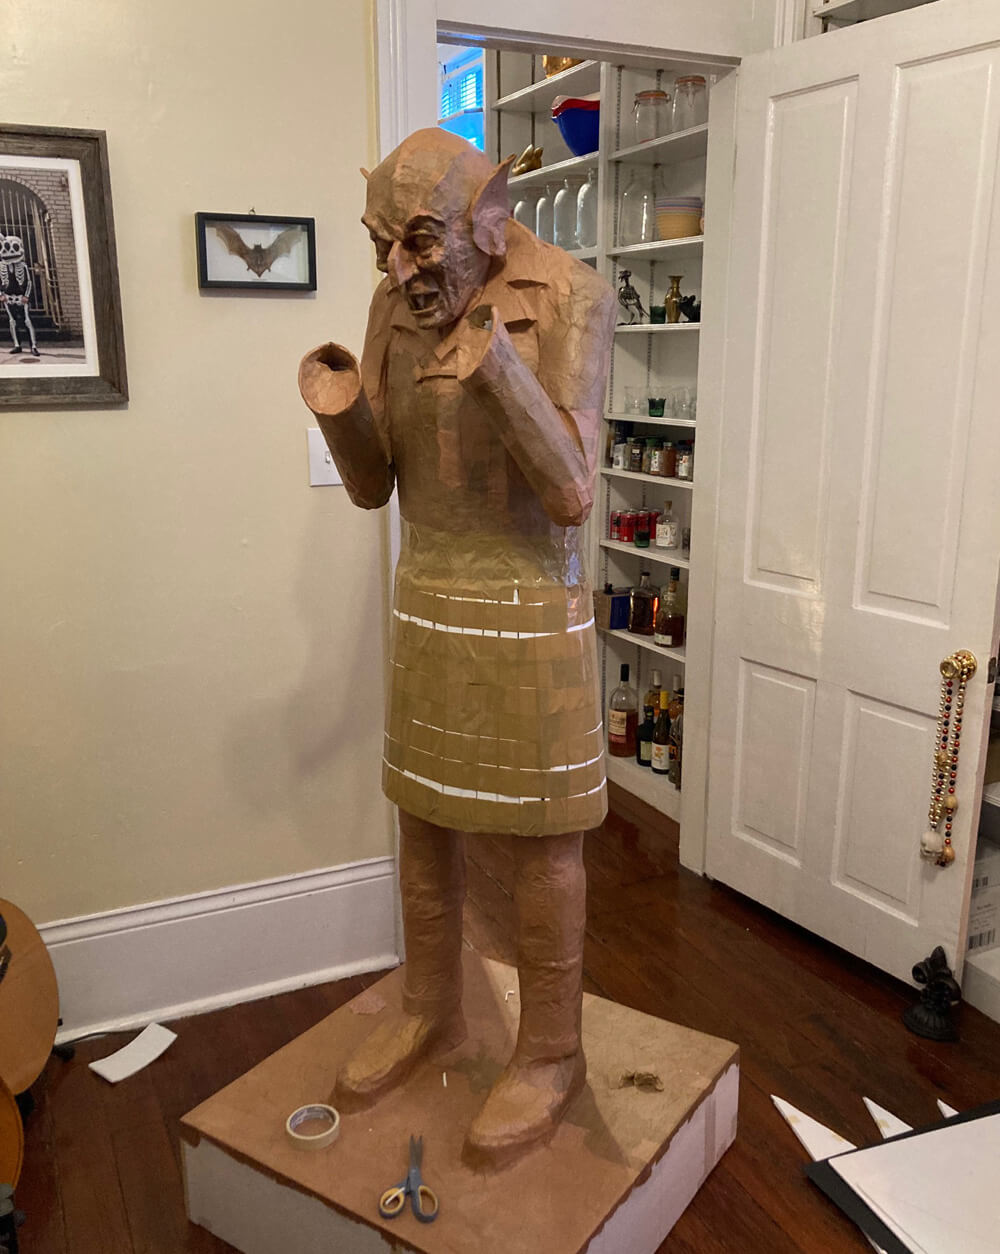 DIY Nosferatu statue - building the skirt section of the coat